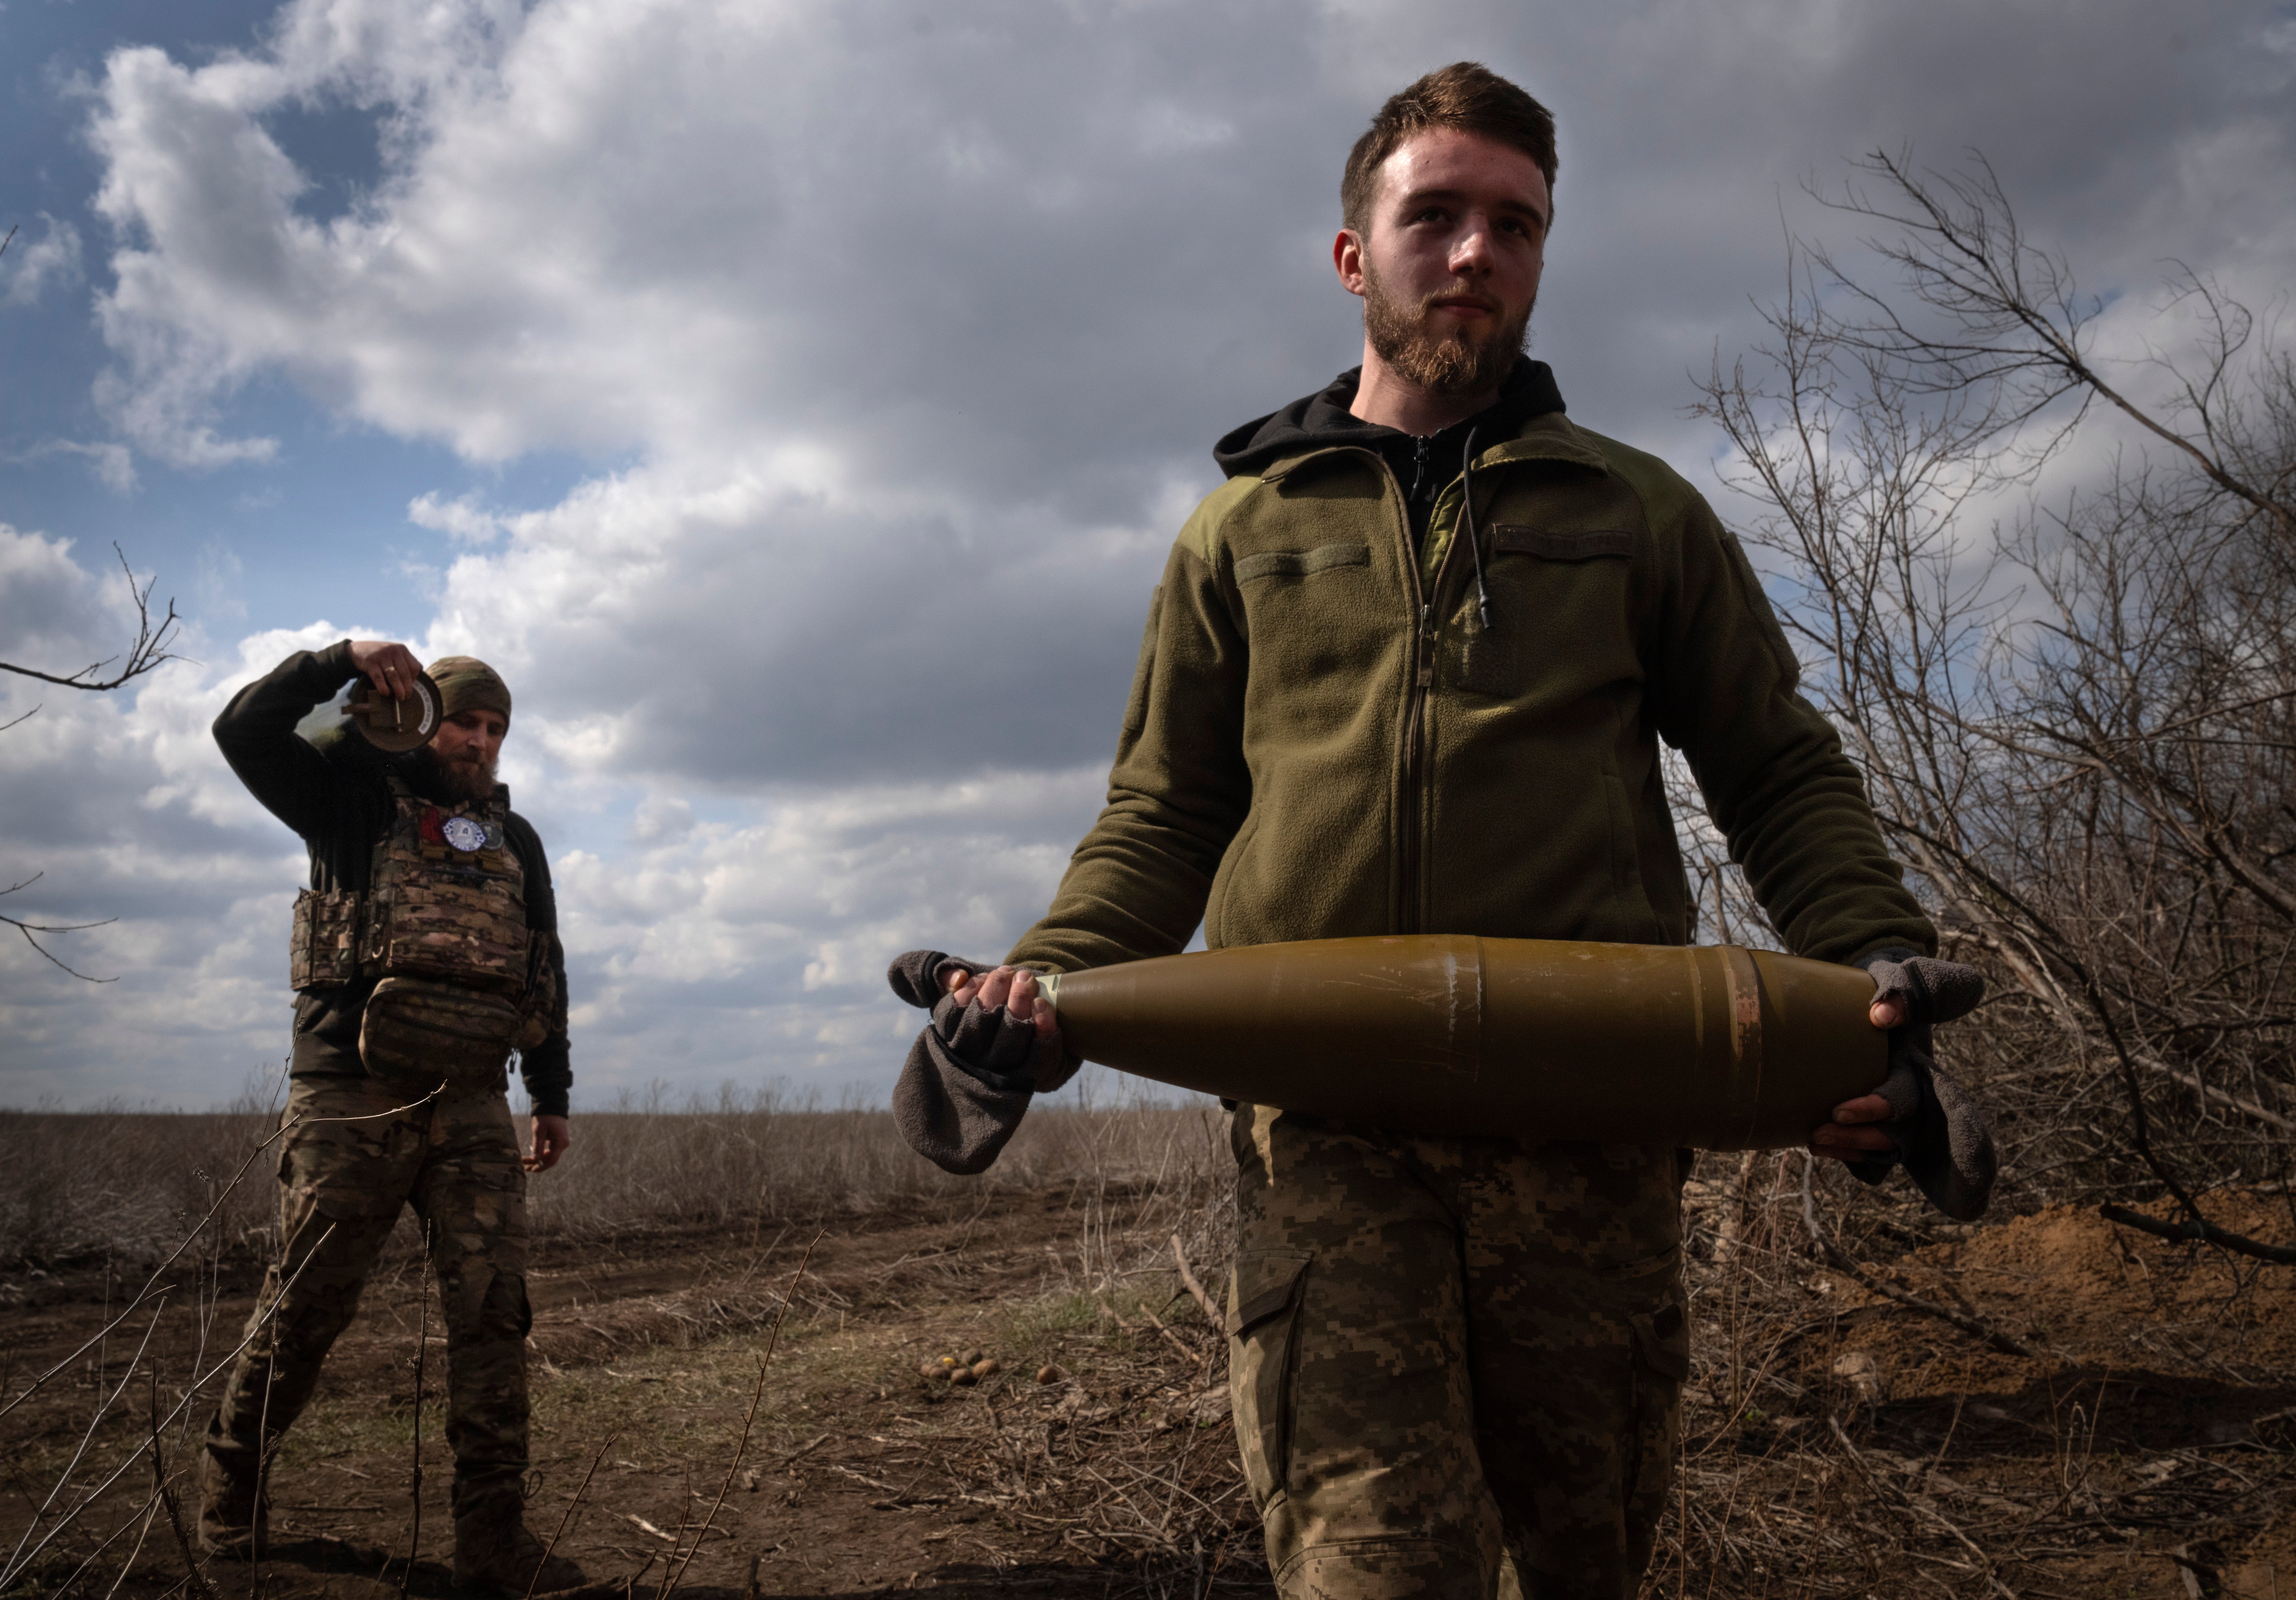 Ukraine’s lack of artillery shells at the frontline has allowed Russia to seize the initiative and take several towns